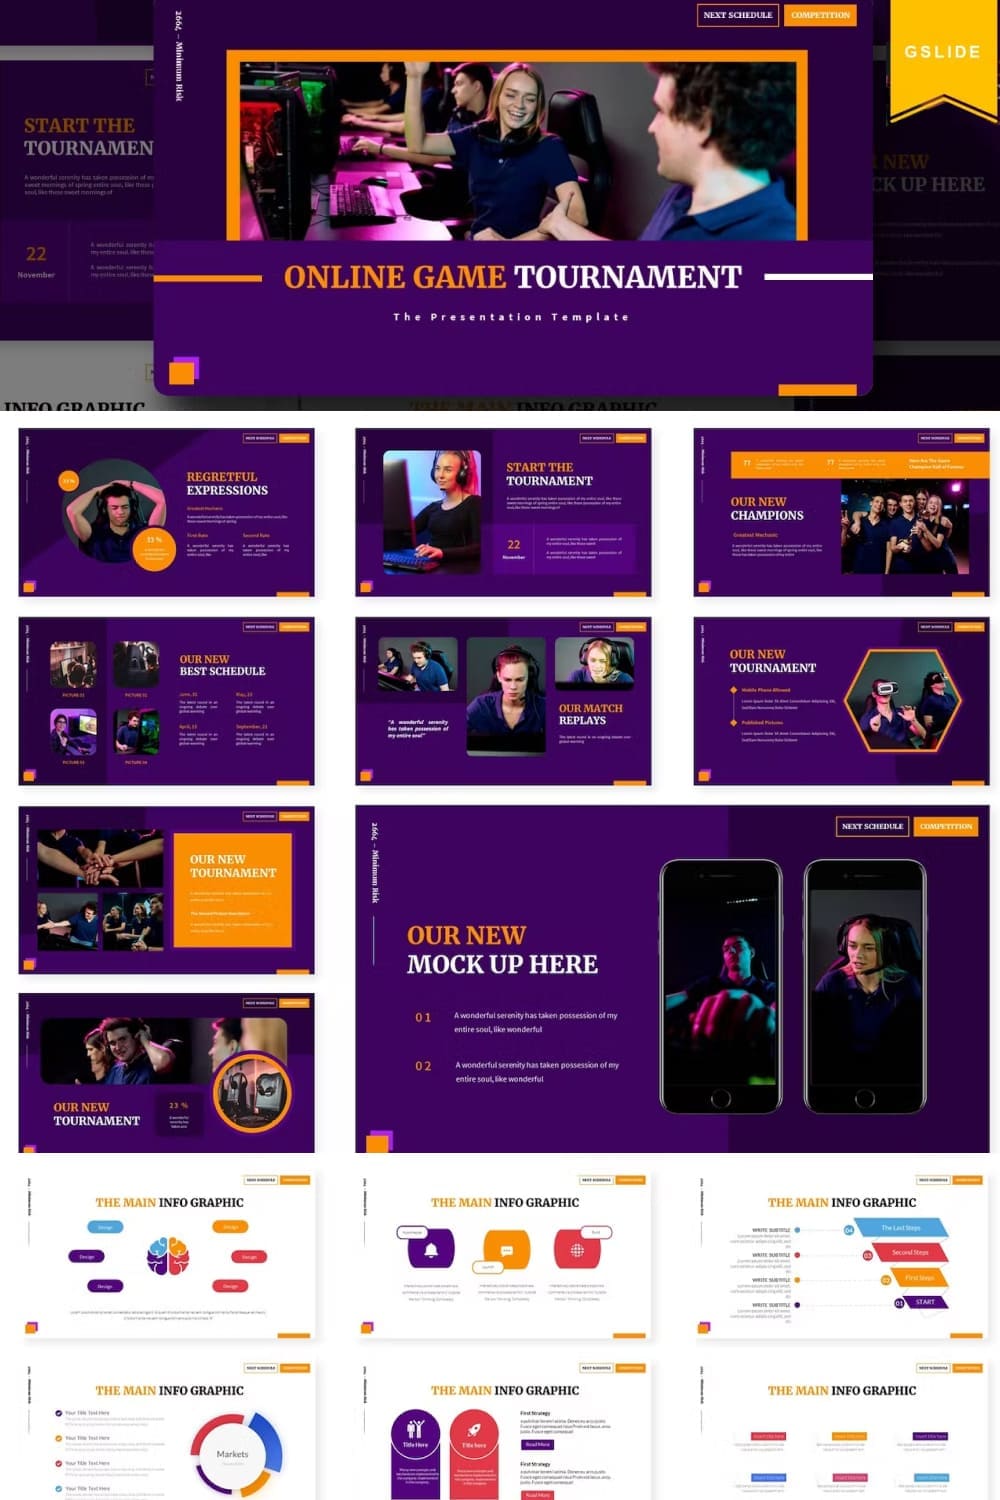 New champions of Online Game Tournament | Google Slides Template.